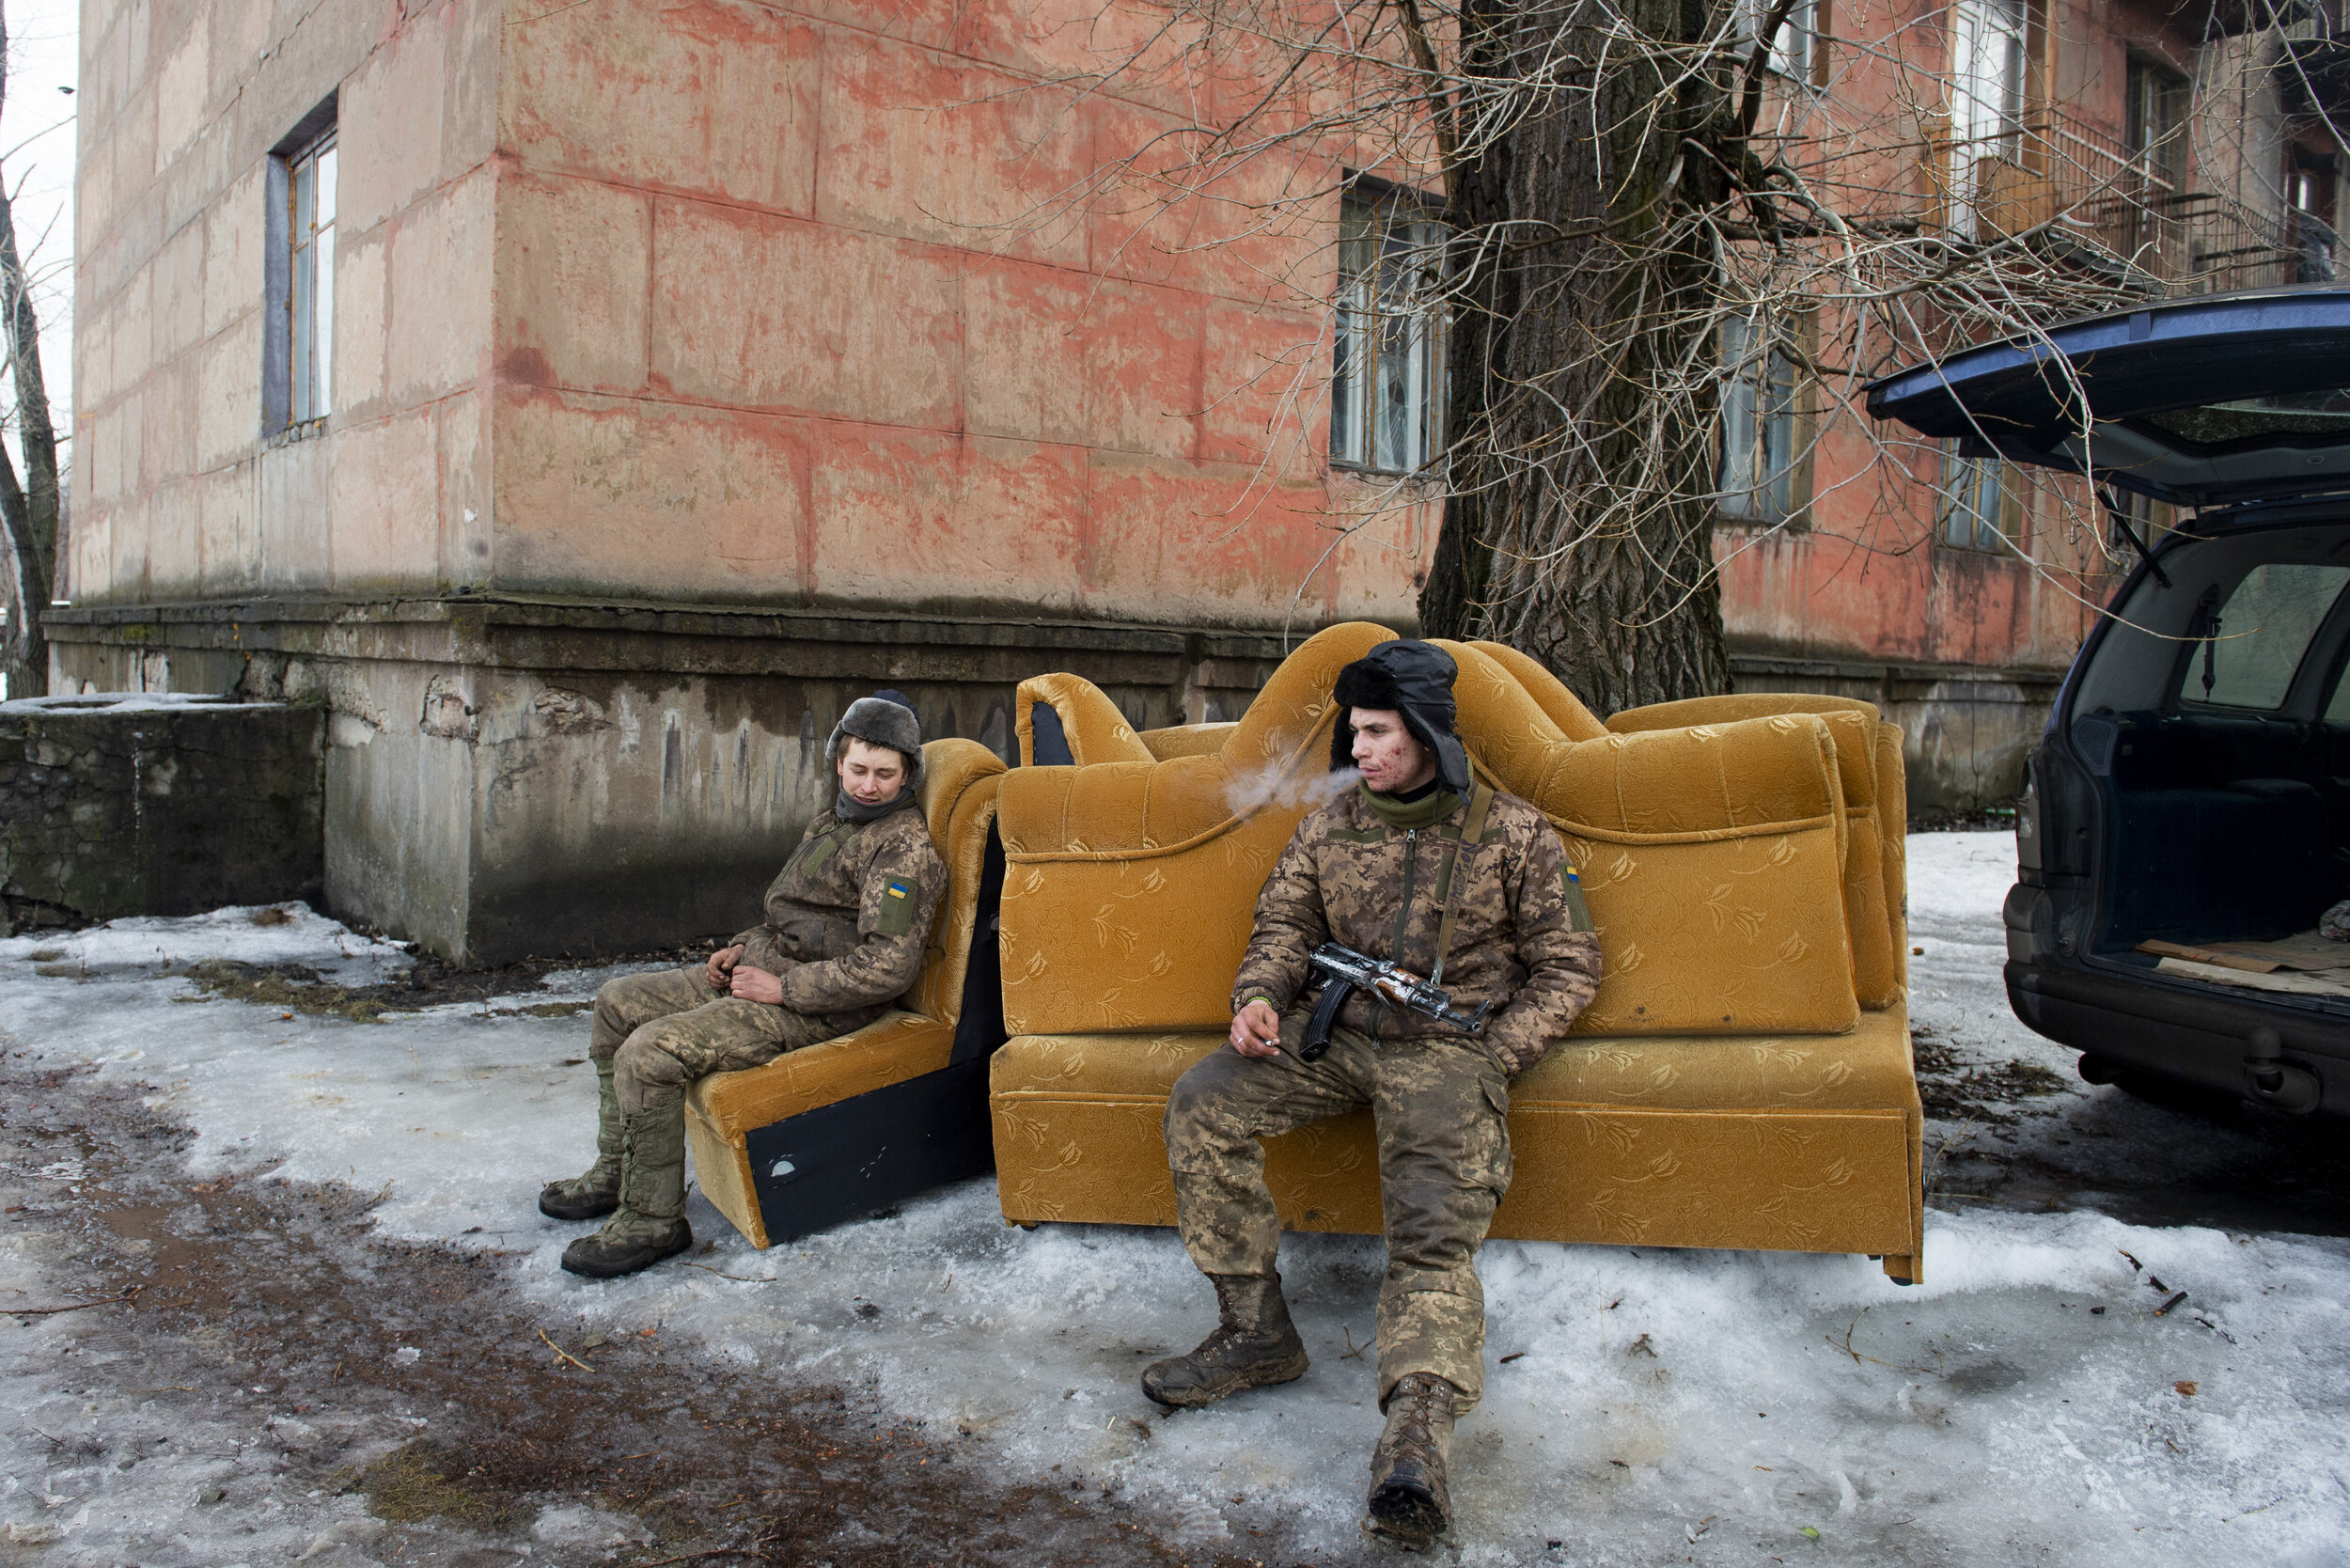  Soldiers of the 54th Mechanized Rifle Brigade take a smoke break while assisting civilians to move during a brief lull in separatist shelling on March 1, 2019 in Zolote-4. The small city of Zolote has been on the frontlines of the Donbas War since i